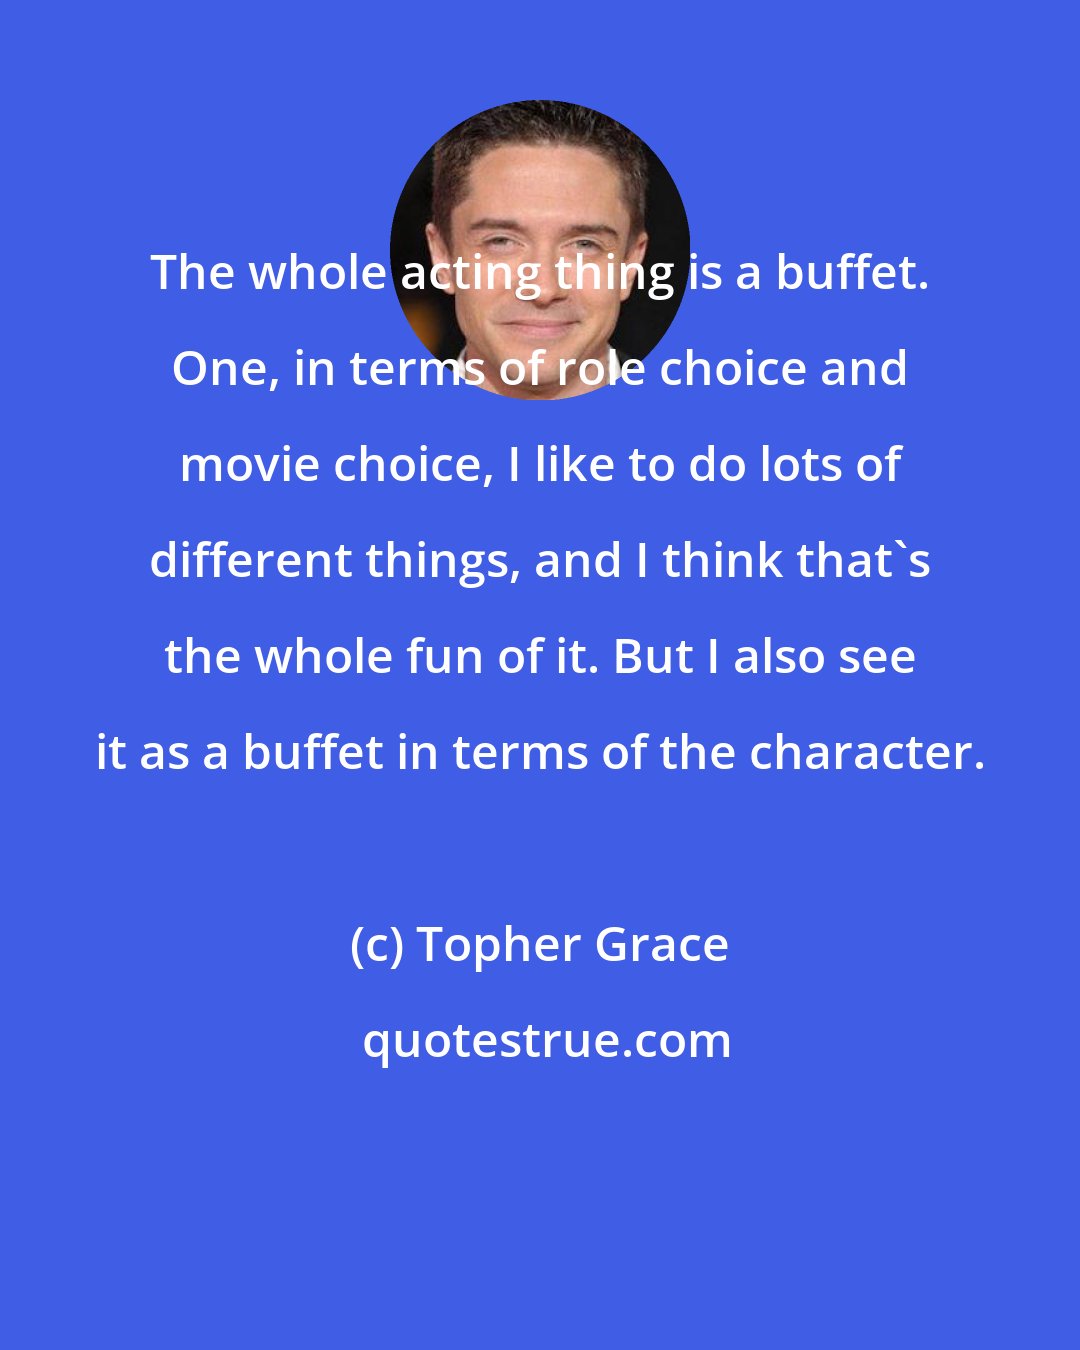 Topher Grace: The whole acting thing is a buffet. One, in terms of role choice and movie choice, I like to do lots of different things, and I think that's the whole fun of it. But I also see it as a buffet in terms of the character.